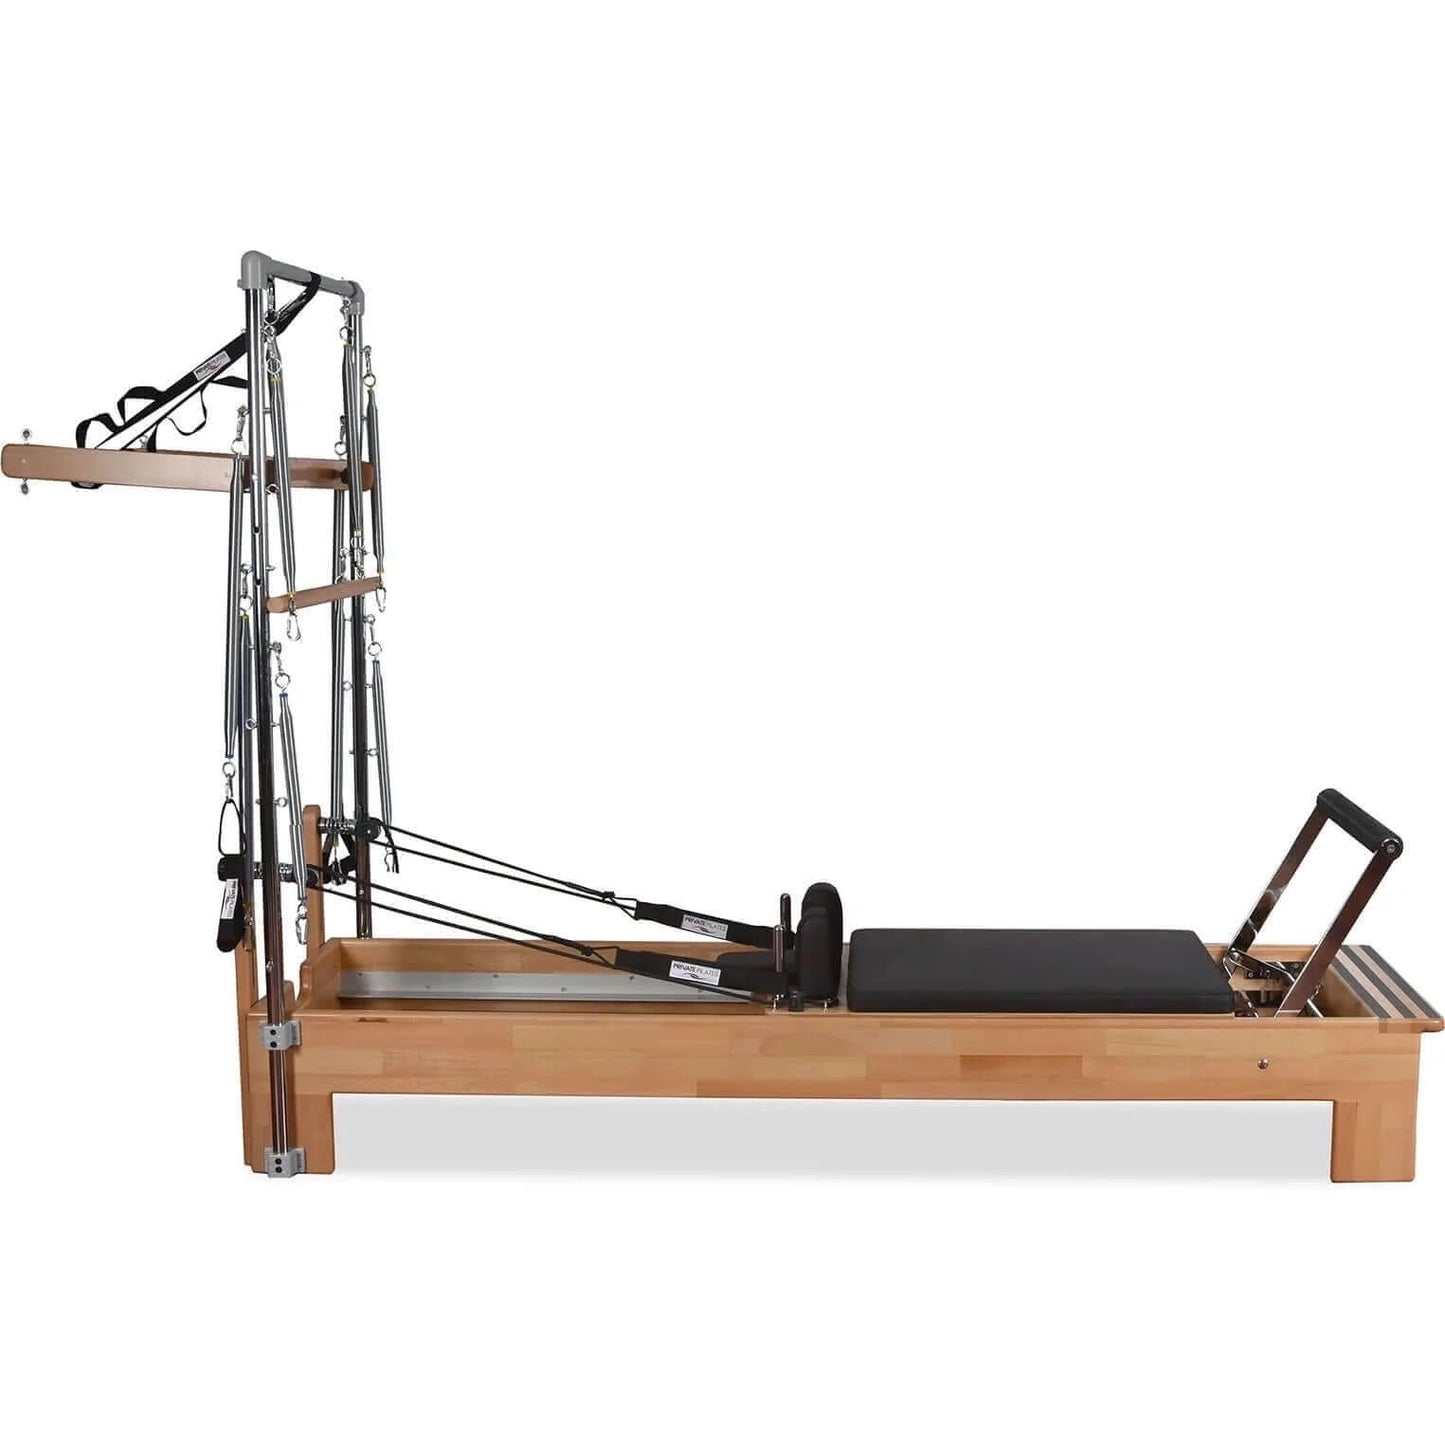 Black Private Pilates Wood Reformer With Tower by Private Pilates sold by Pilates Matters® by BSP LLC